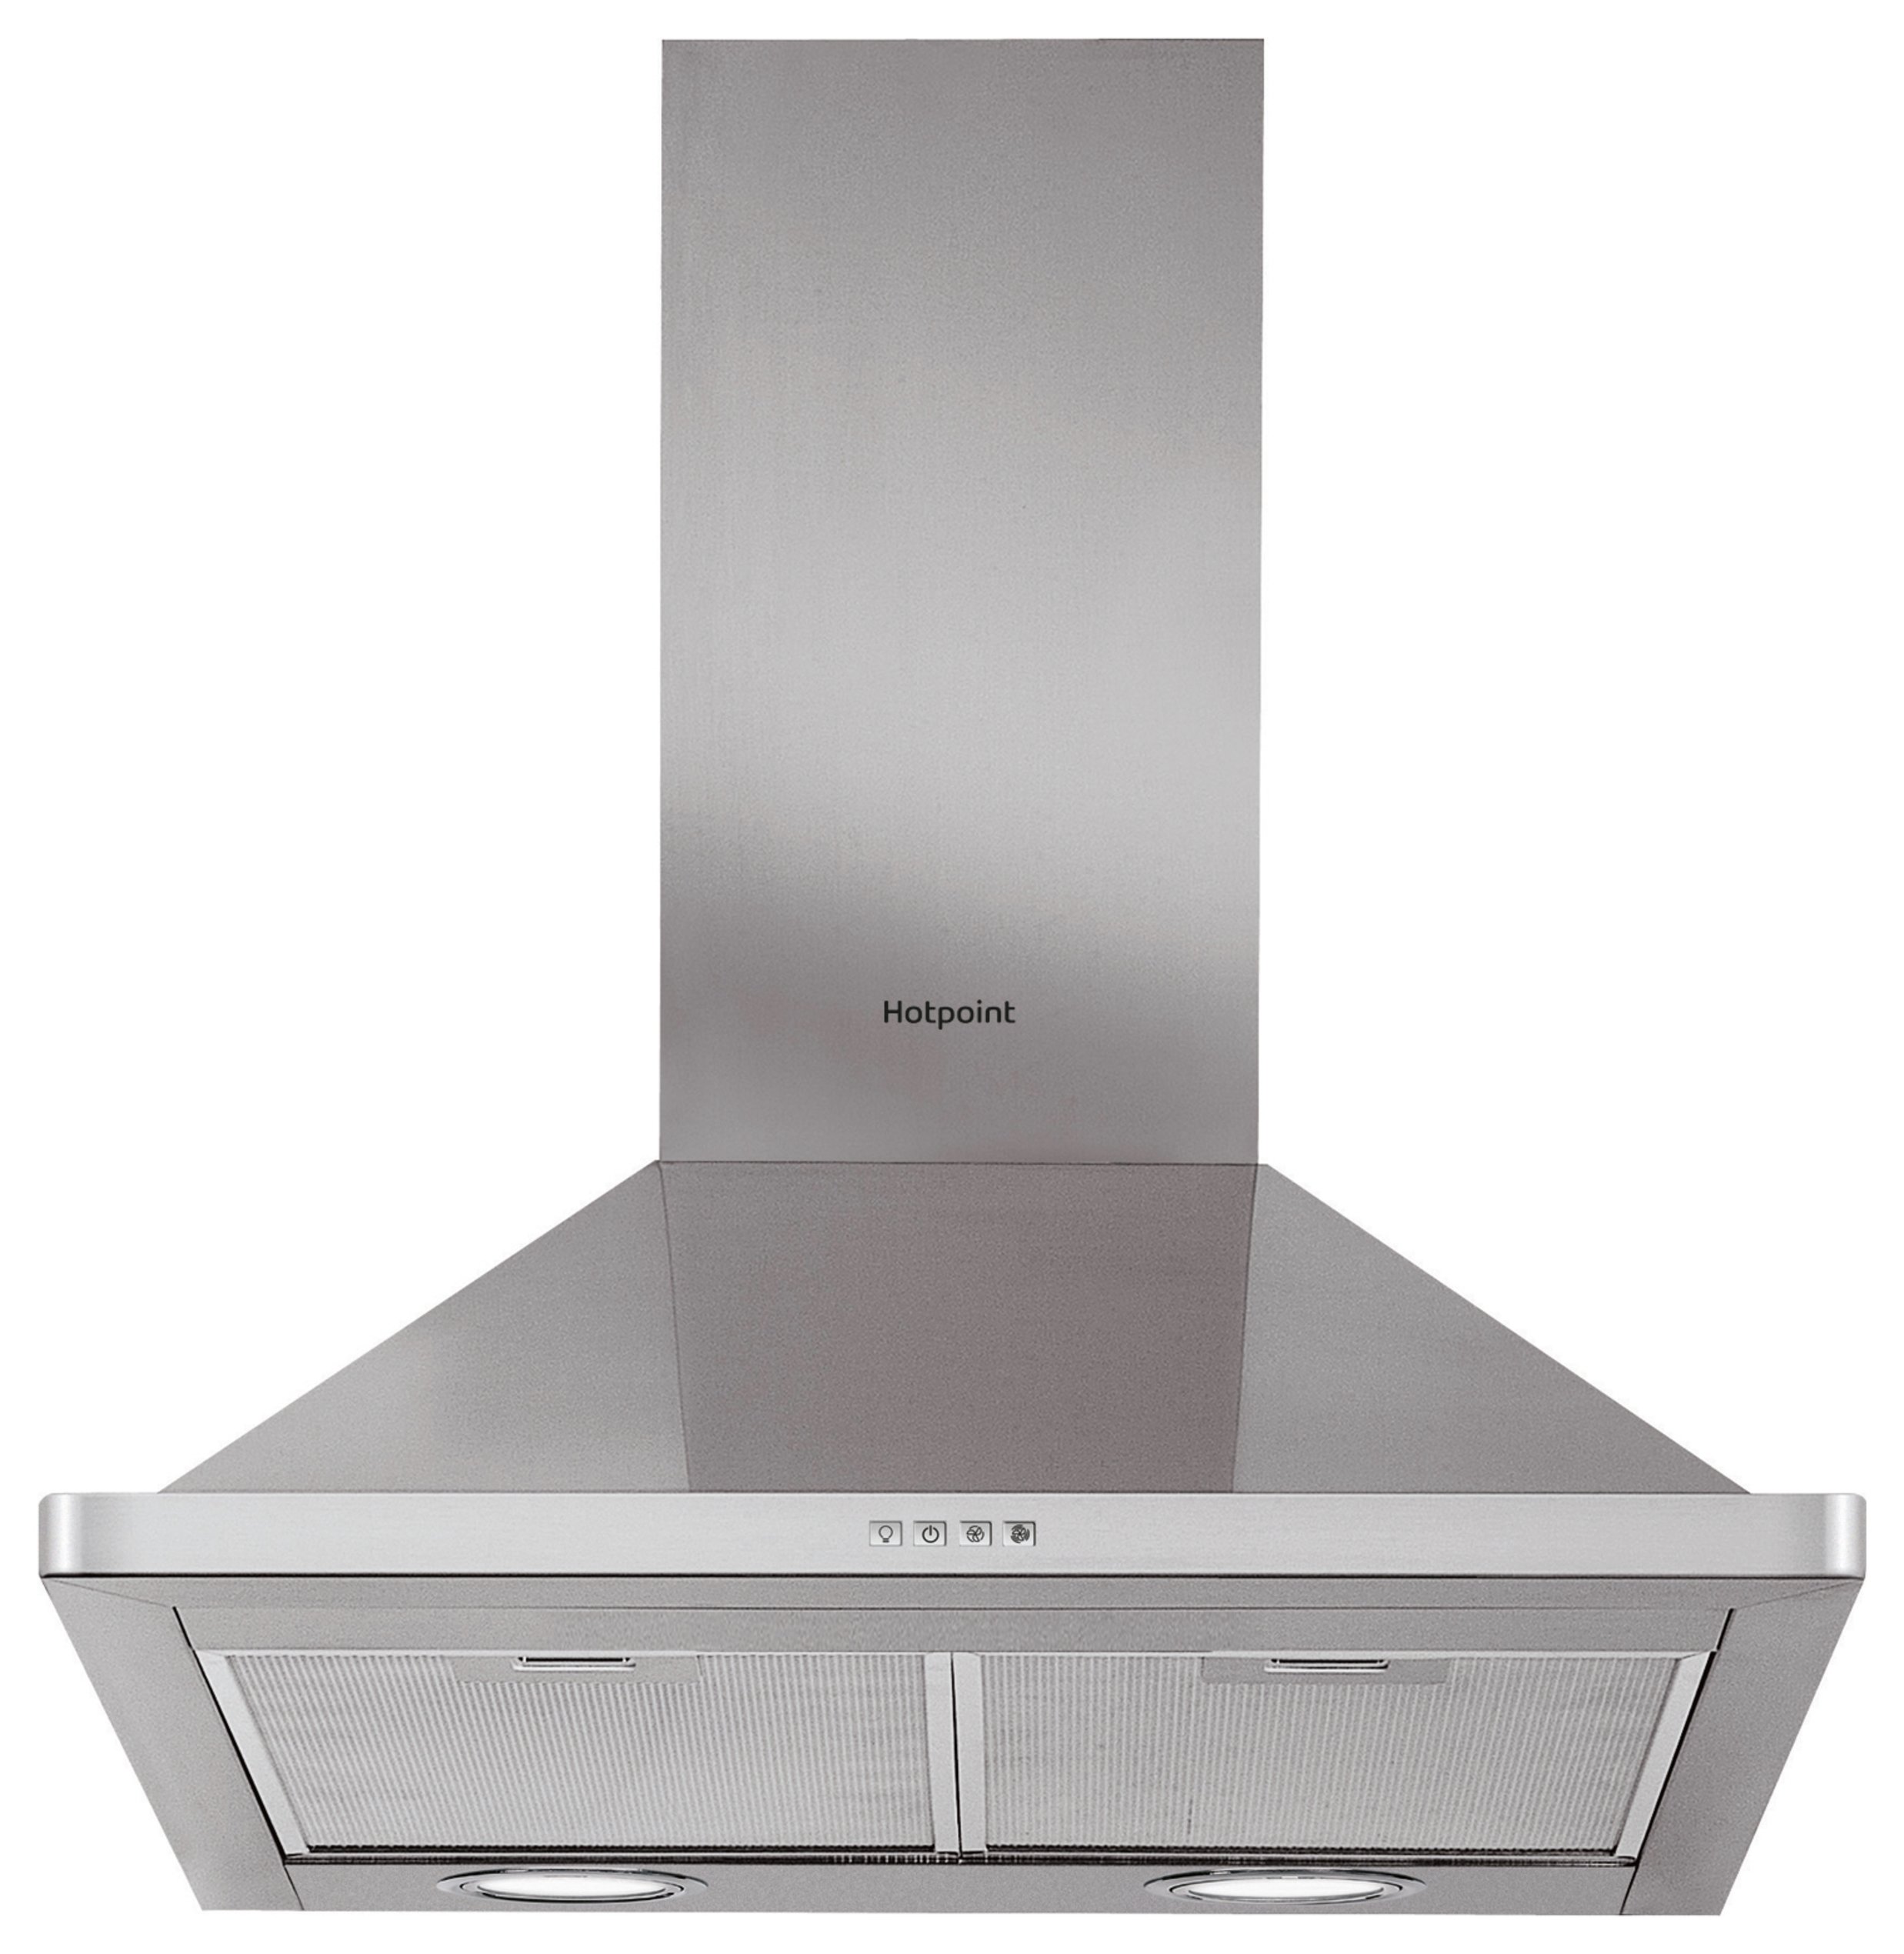 Hotpoint PHPN64FAMX 60cm Cooker Hood - Stainless Steel